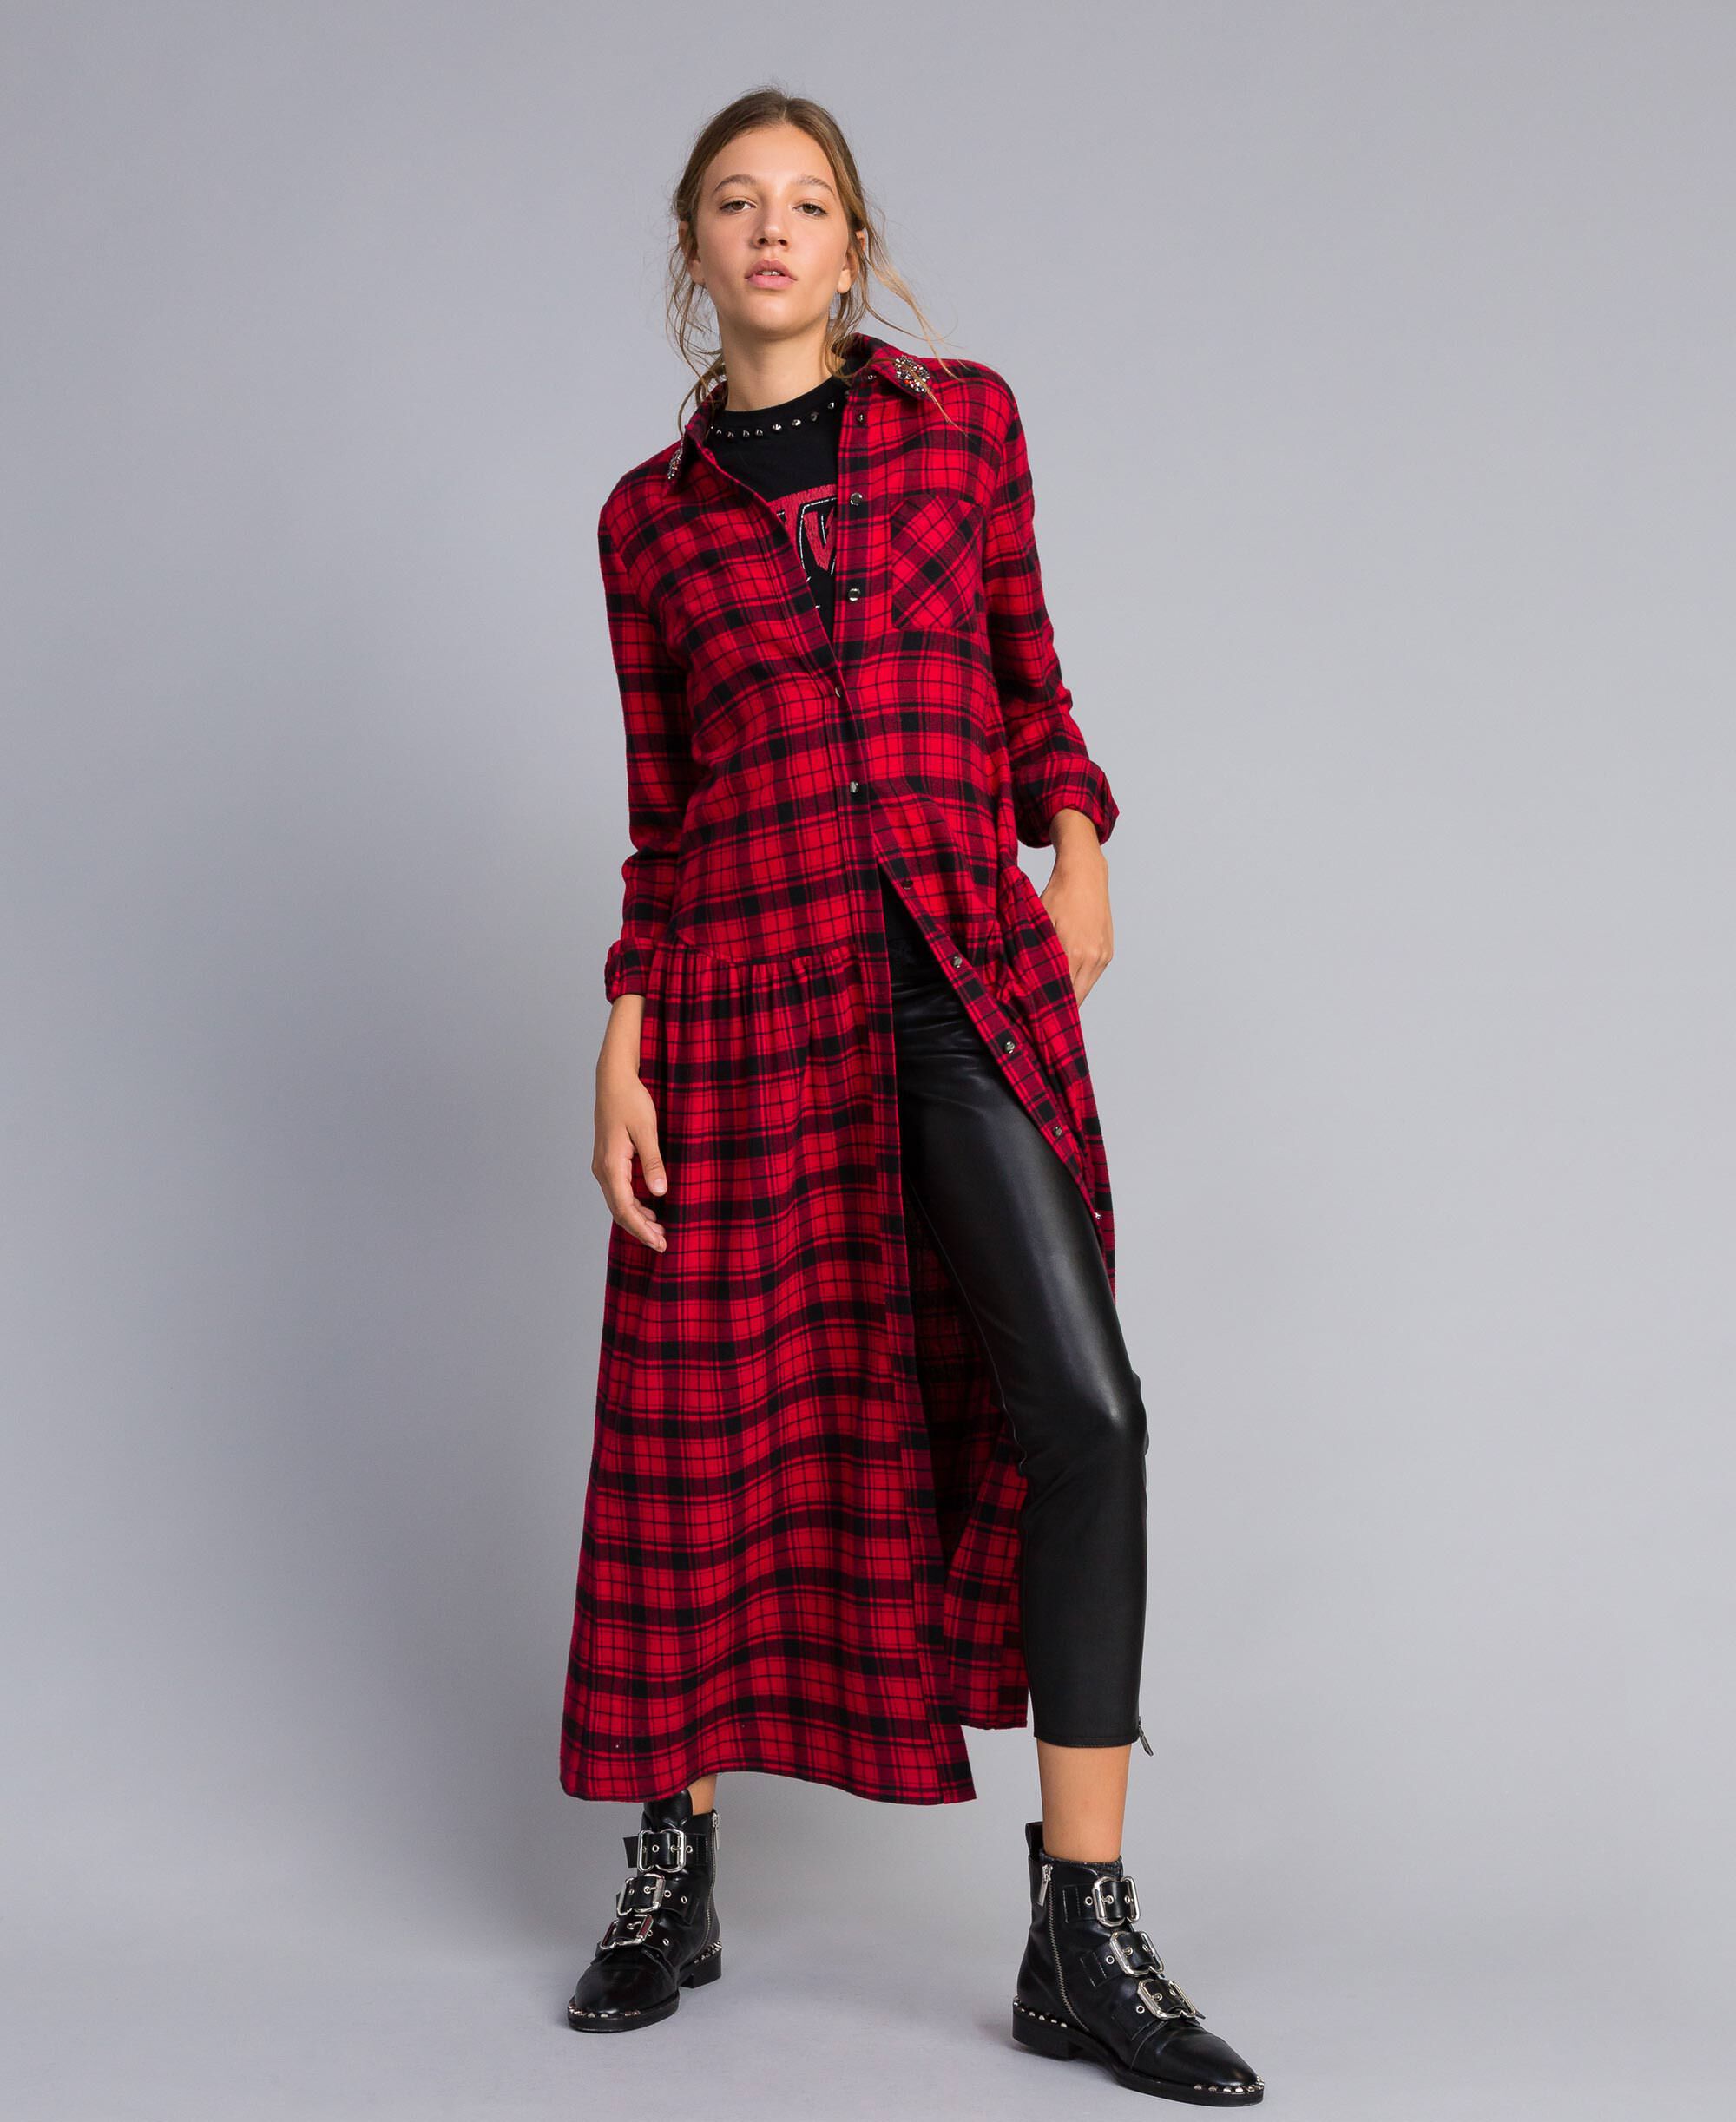 flannel dress with boots